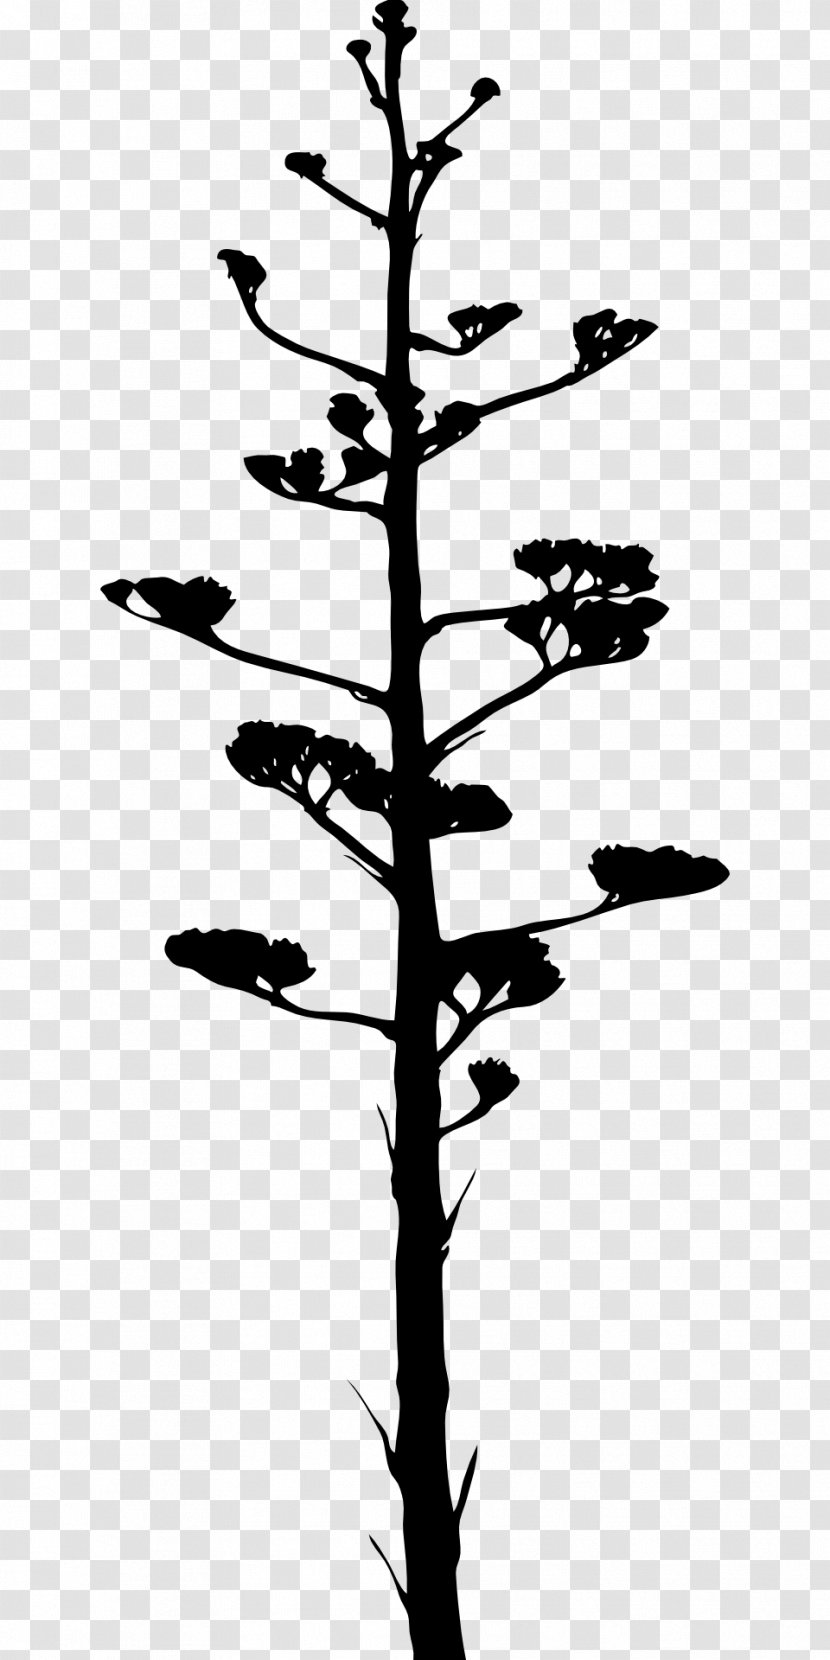 Agave Azul - Tree - Branches Silouhette Transparent PNG